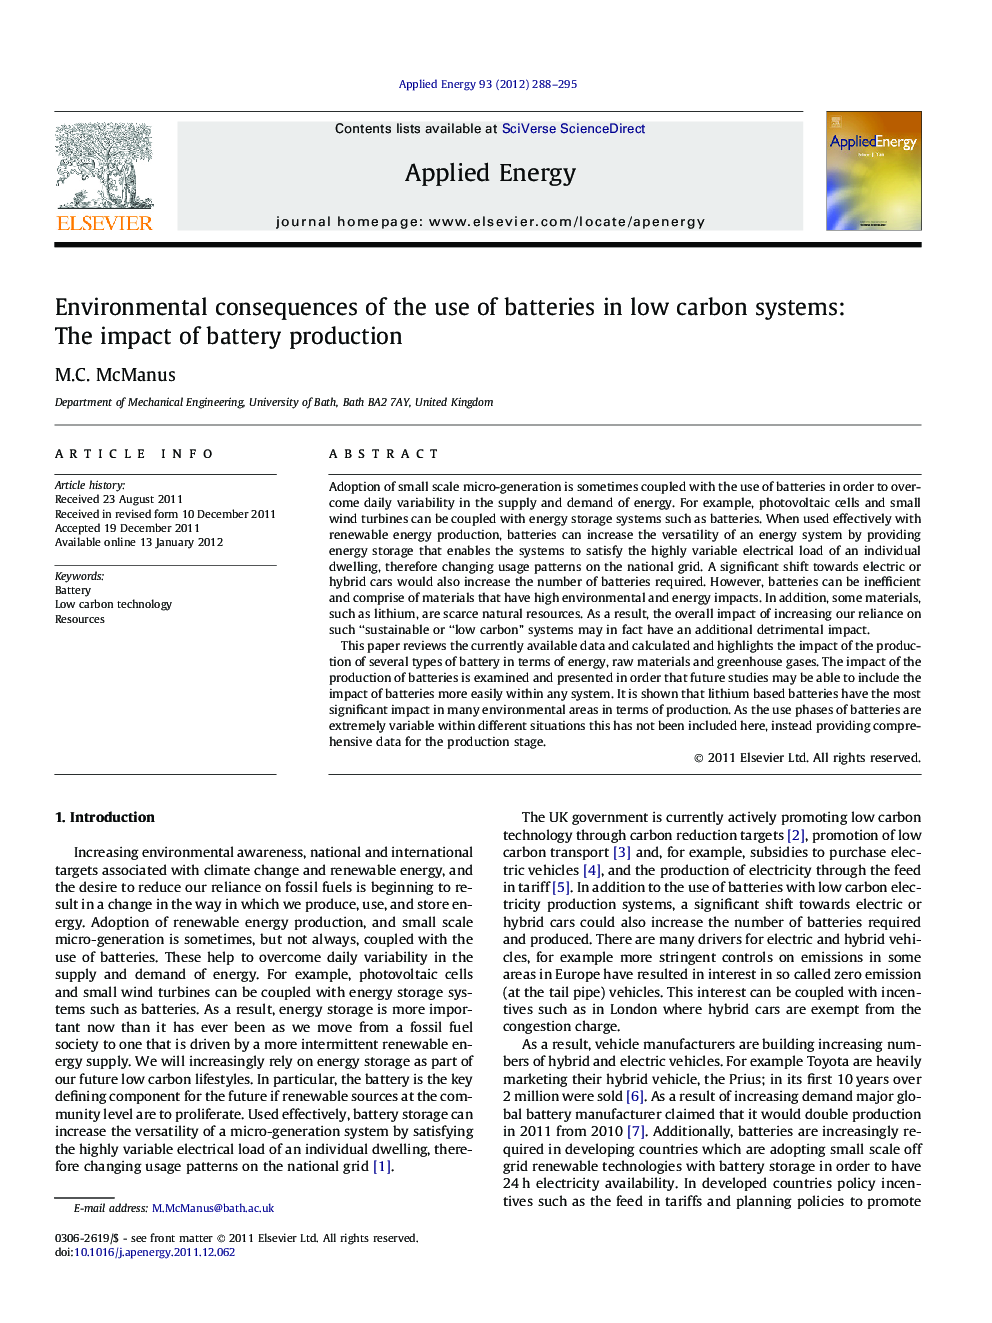 Environmental consequences of the use of batteries in low carbon systems: The impact of battery production